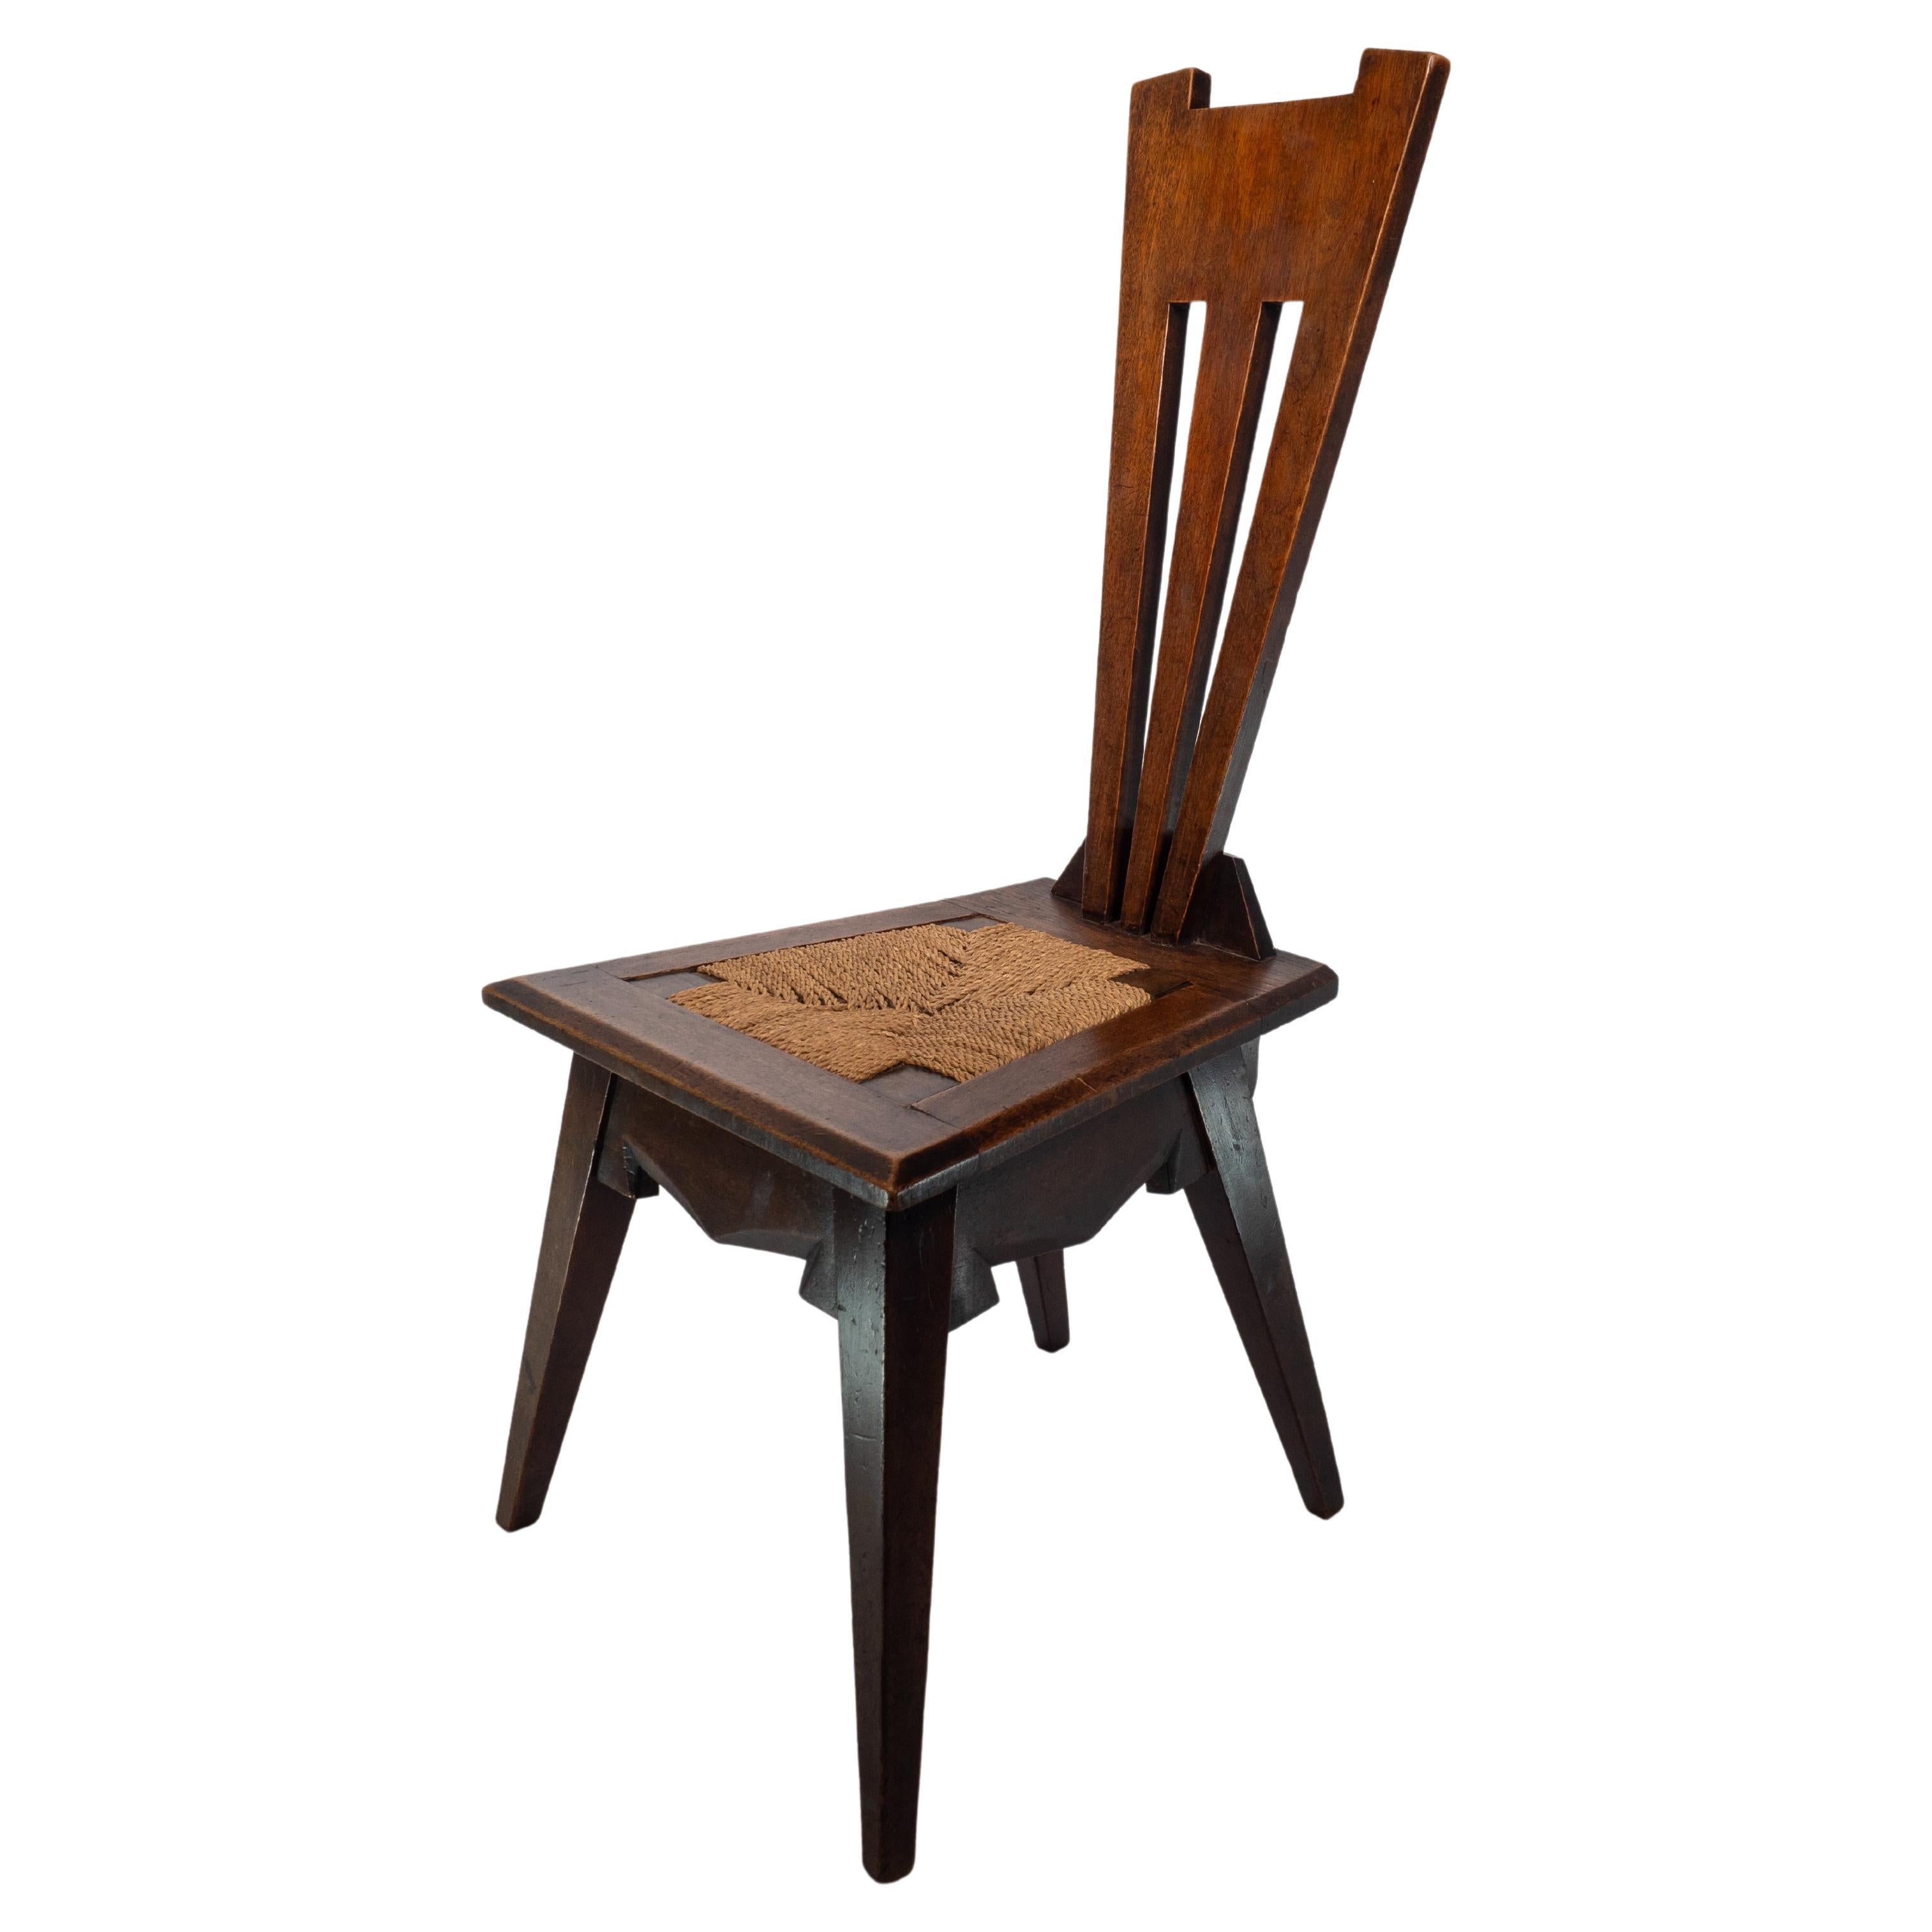 Liberty and Co. An Arts and Crafts Wiclif rush seat side chair.